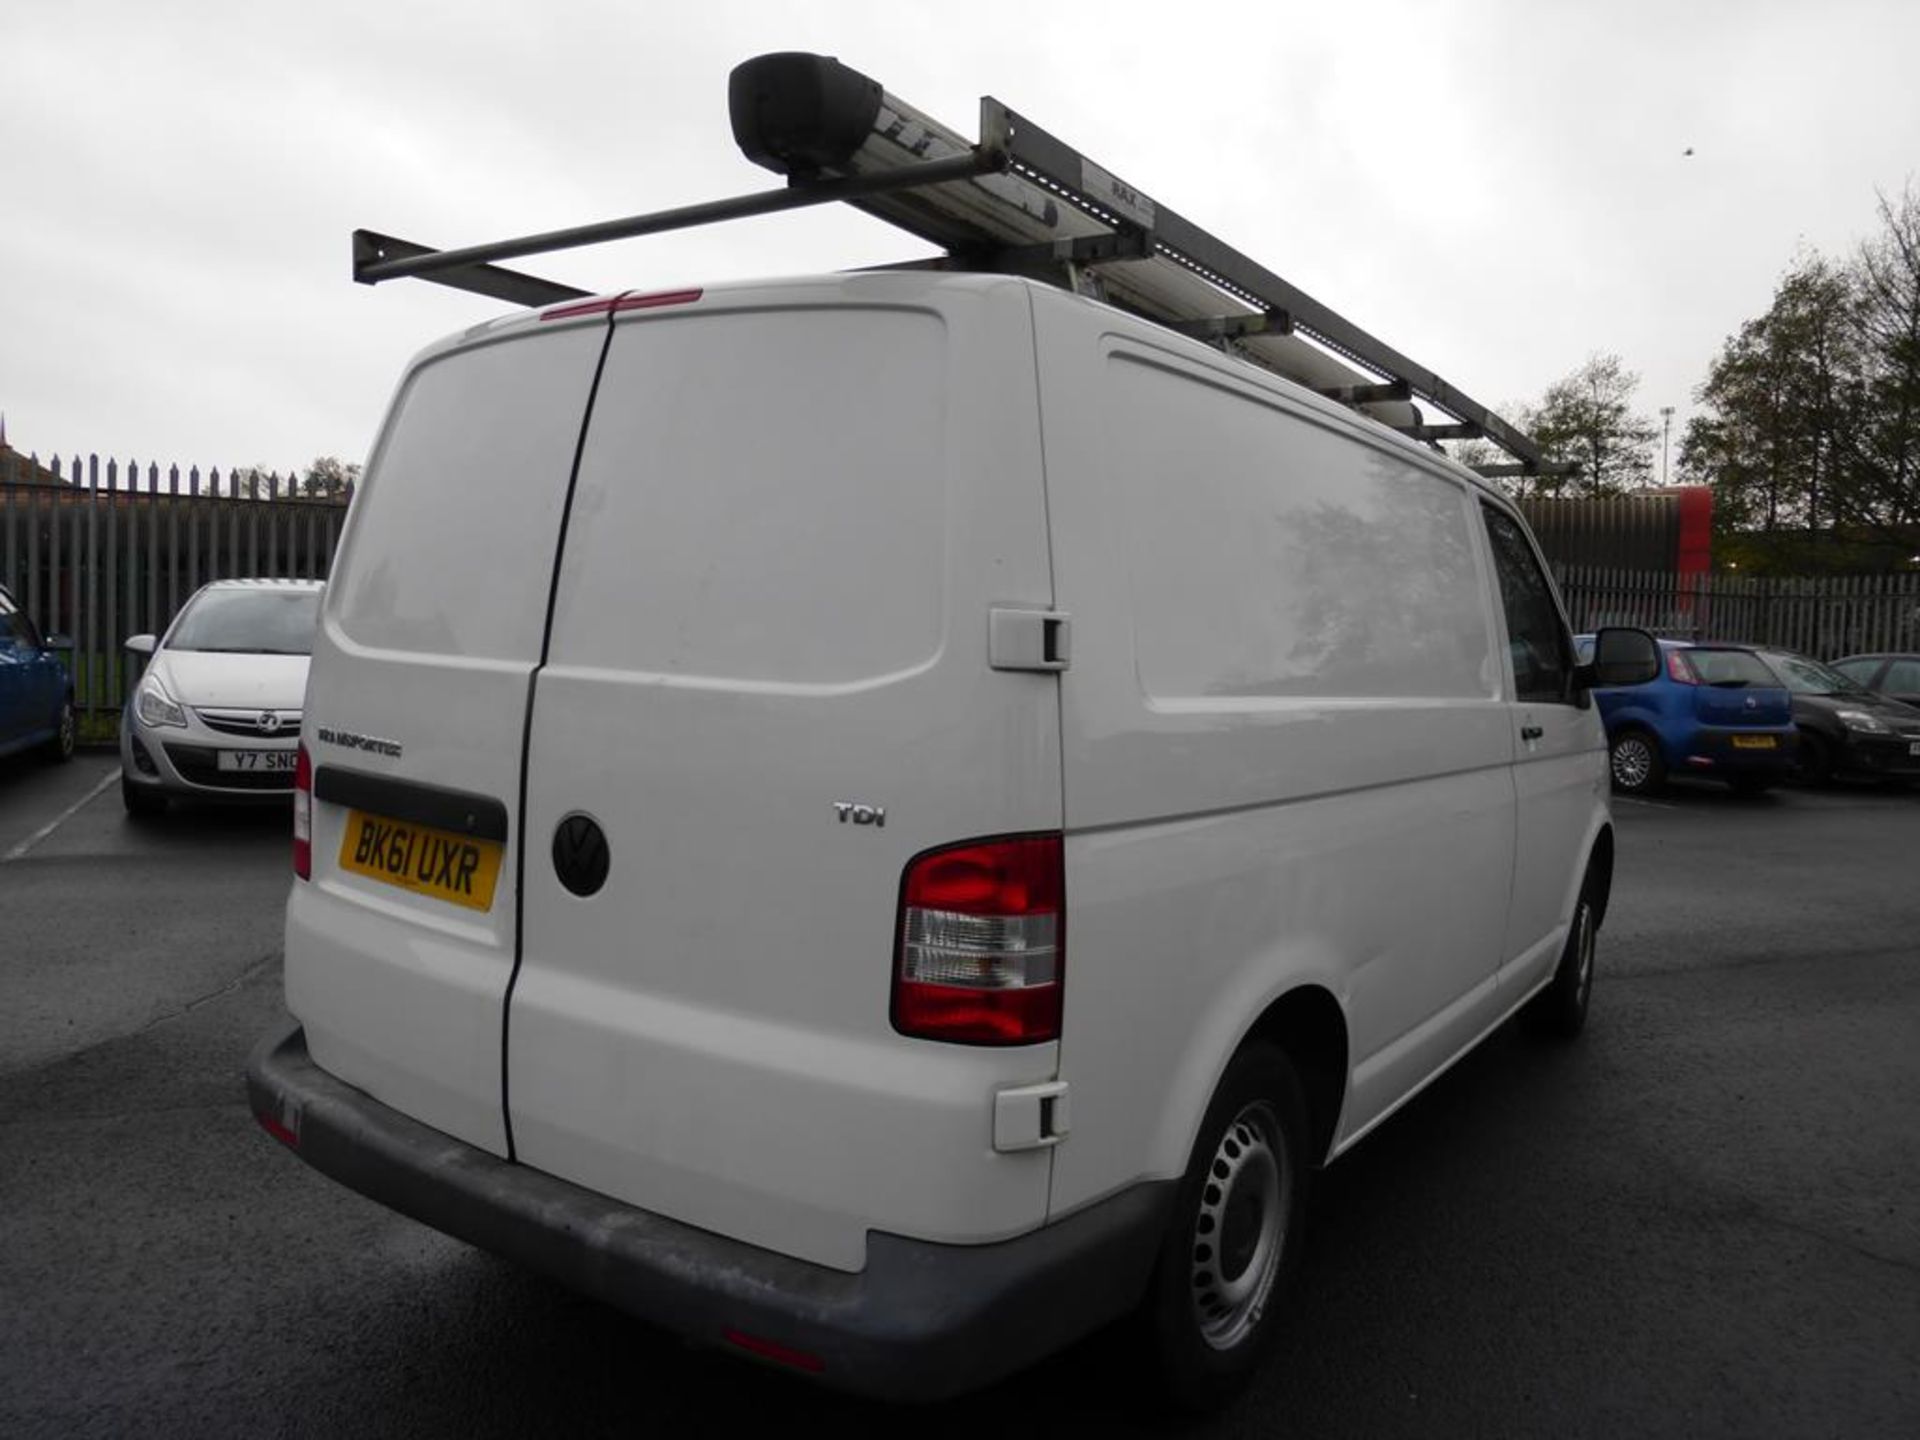 * 2011 Volkswagen Transporter 1968cc Diesel. Revenue Weight 2800Kg, fitted with Roof Rack. - Image 5 of 19